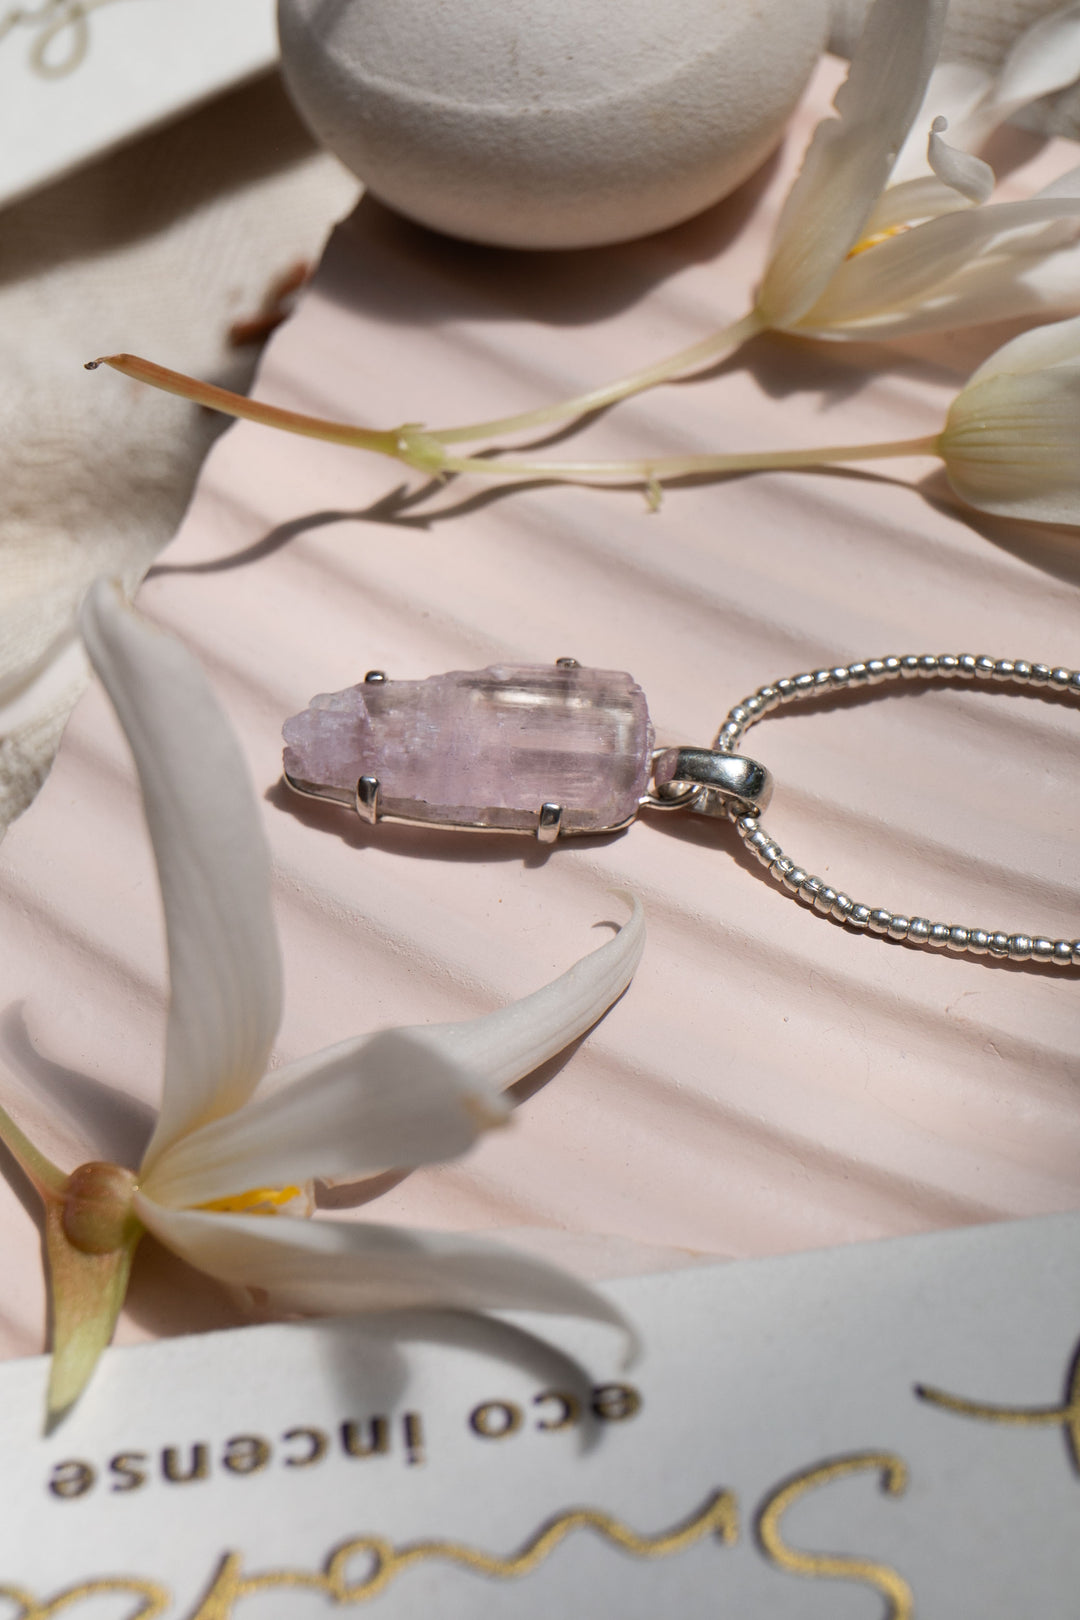 Raw Pink Kunzite Pendant in 92.5% Sterling Silver Claw Setting